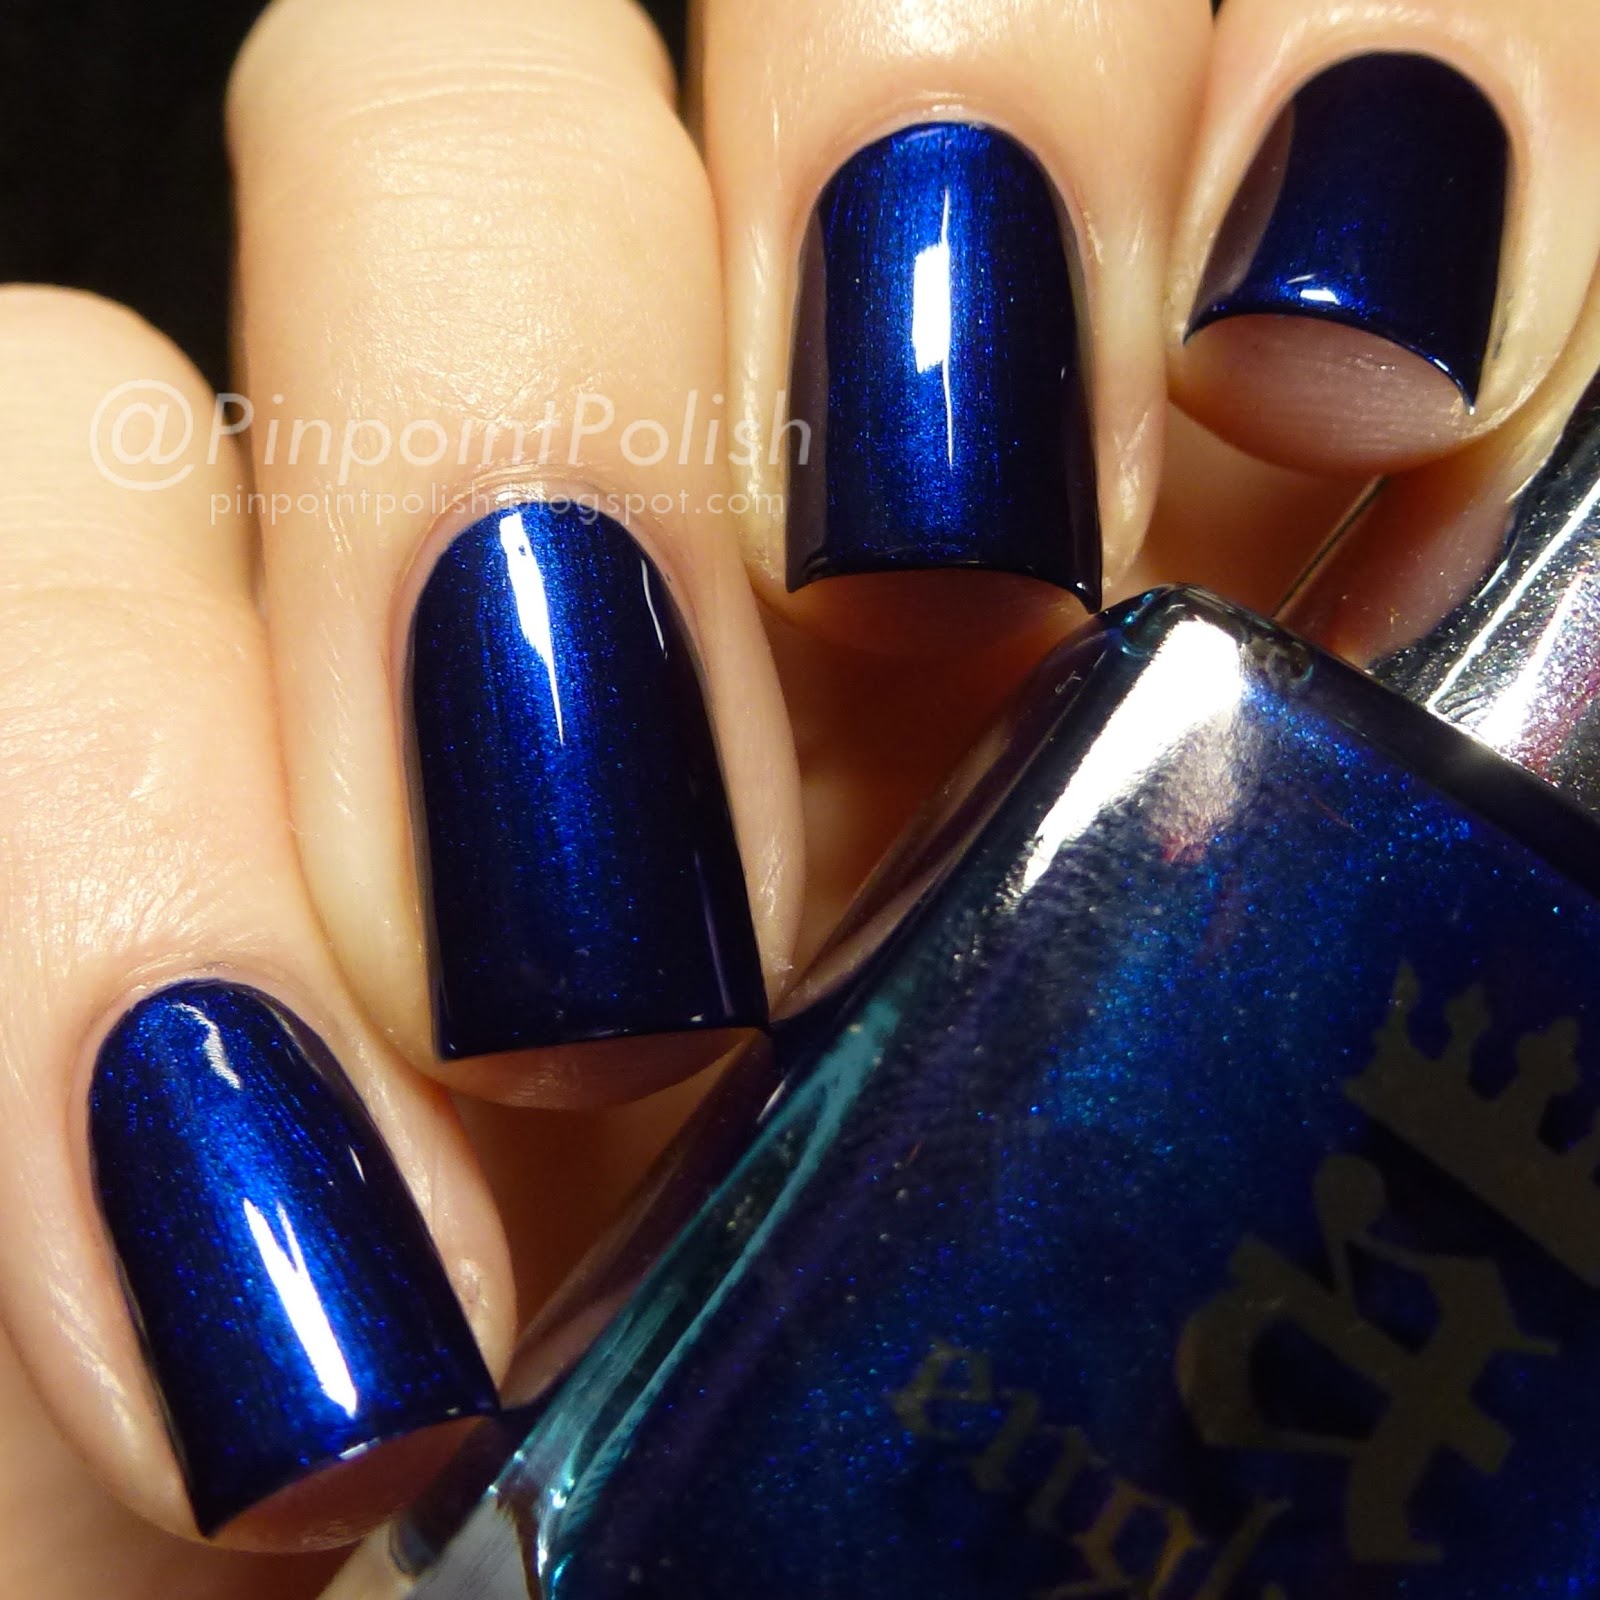 Queen of Scots, a england, swatch